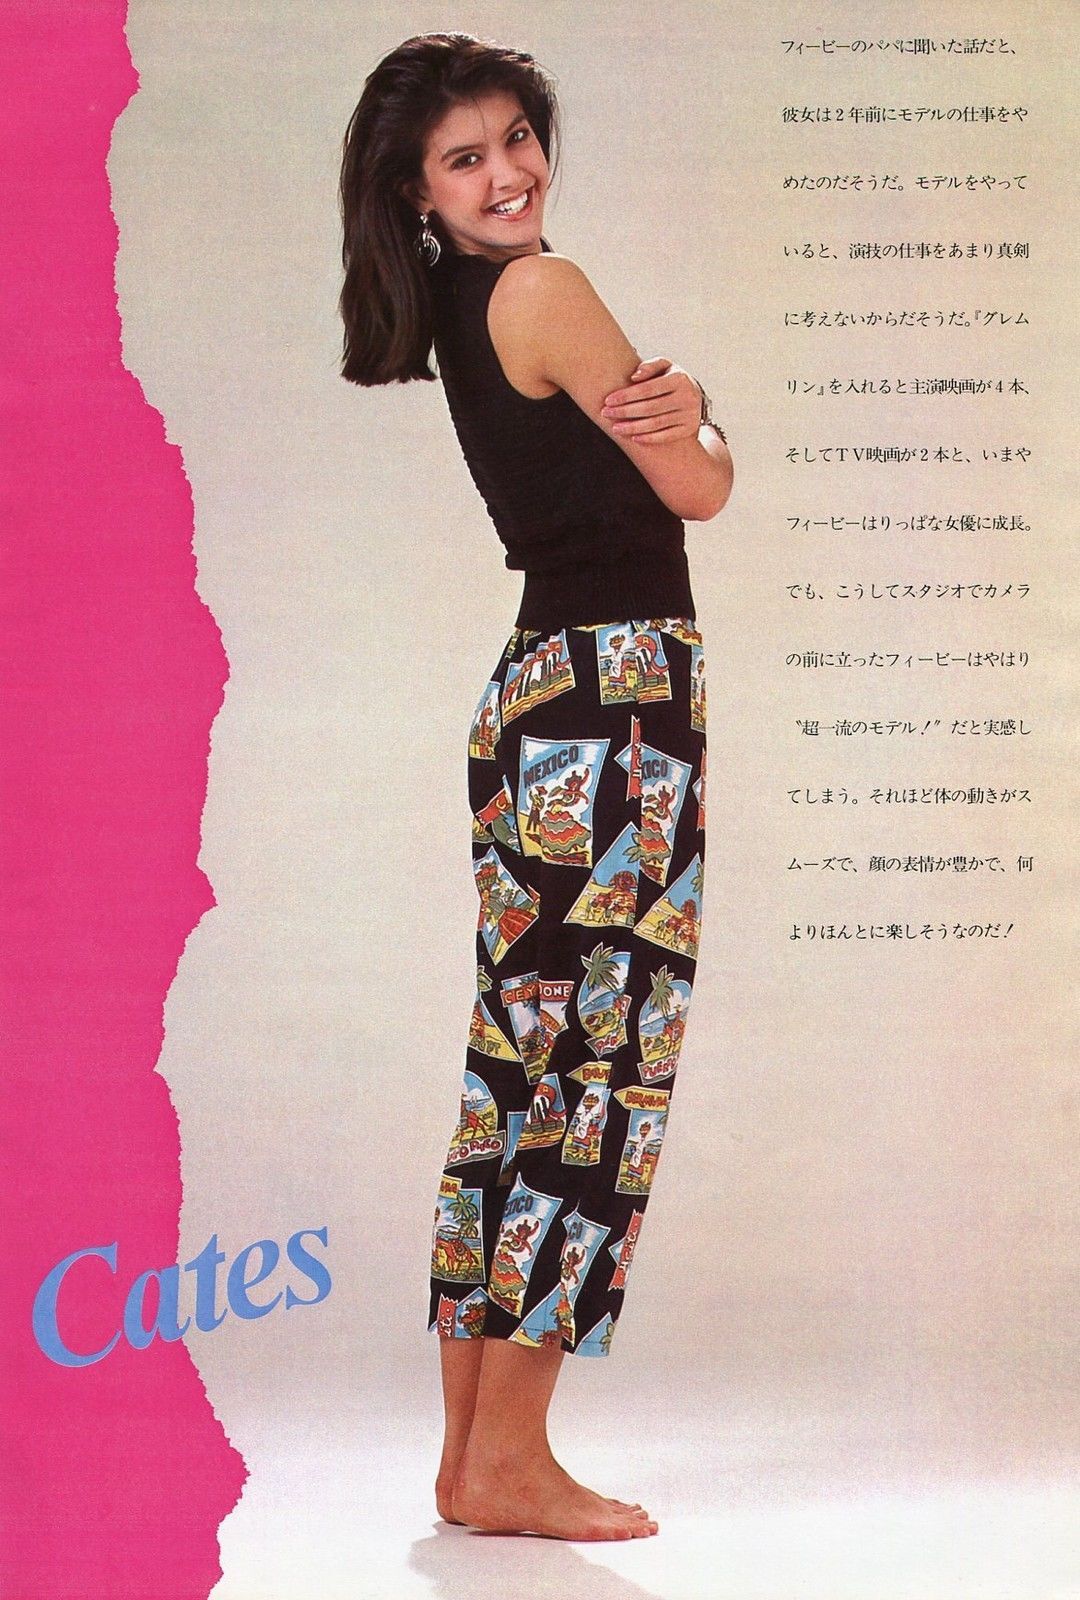 Phoebe Cates butt